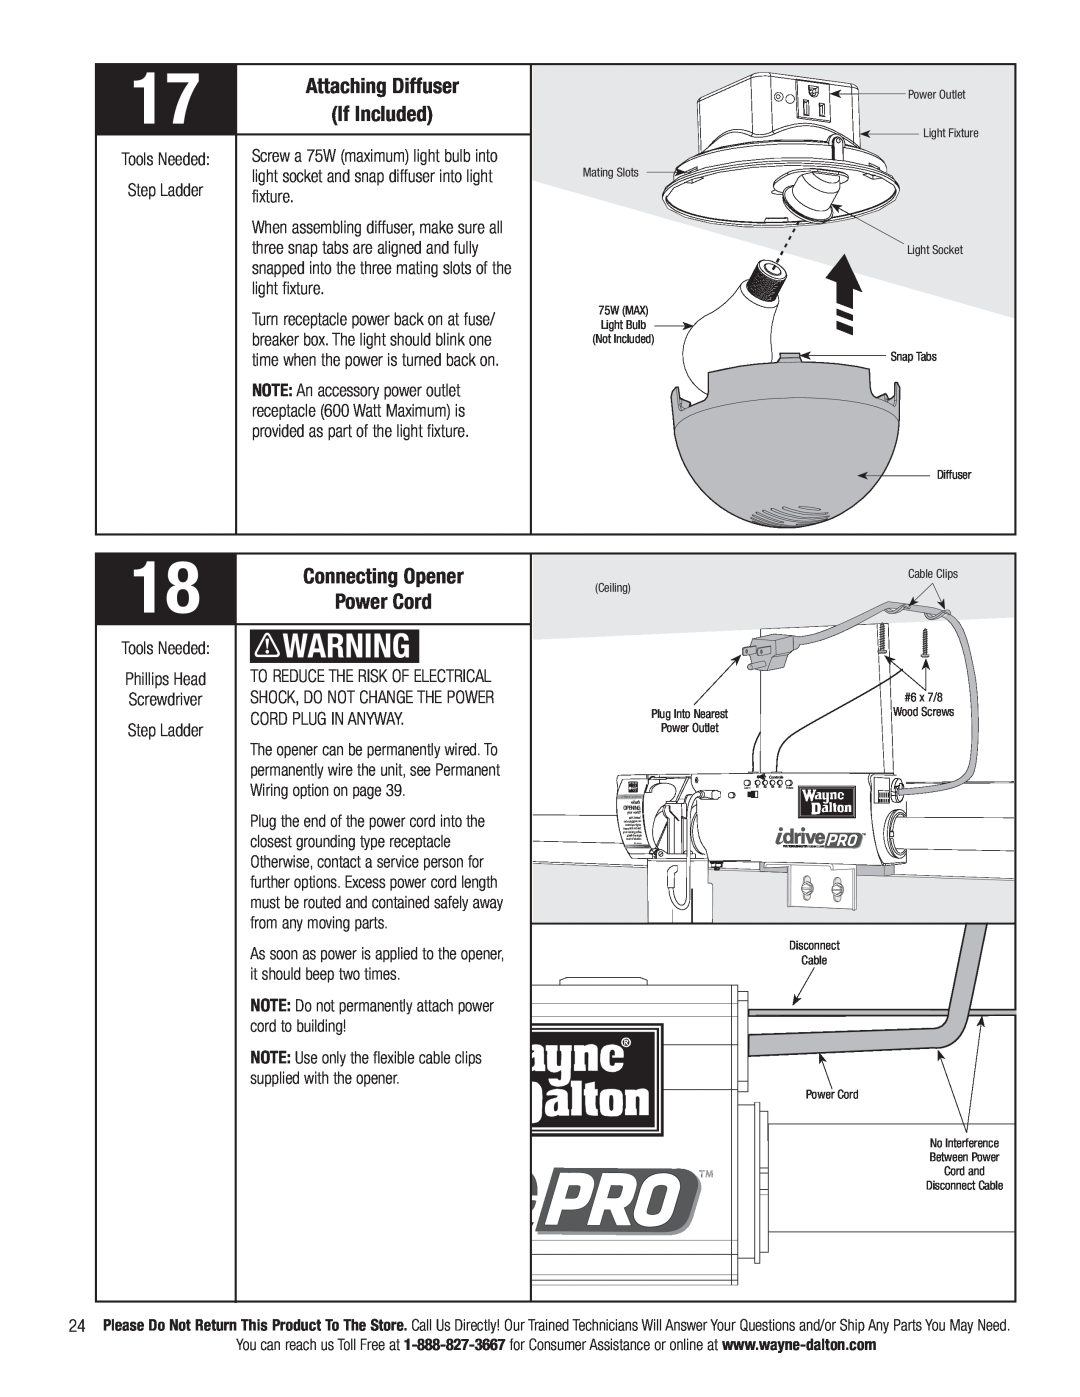 Wayne-Dalton 3790-Z installation instructions Attaching Diffuser, If Included, Connecting Opener, Power Cord 